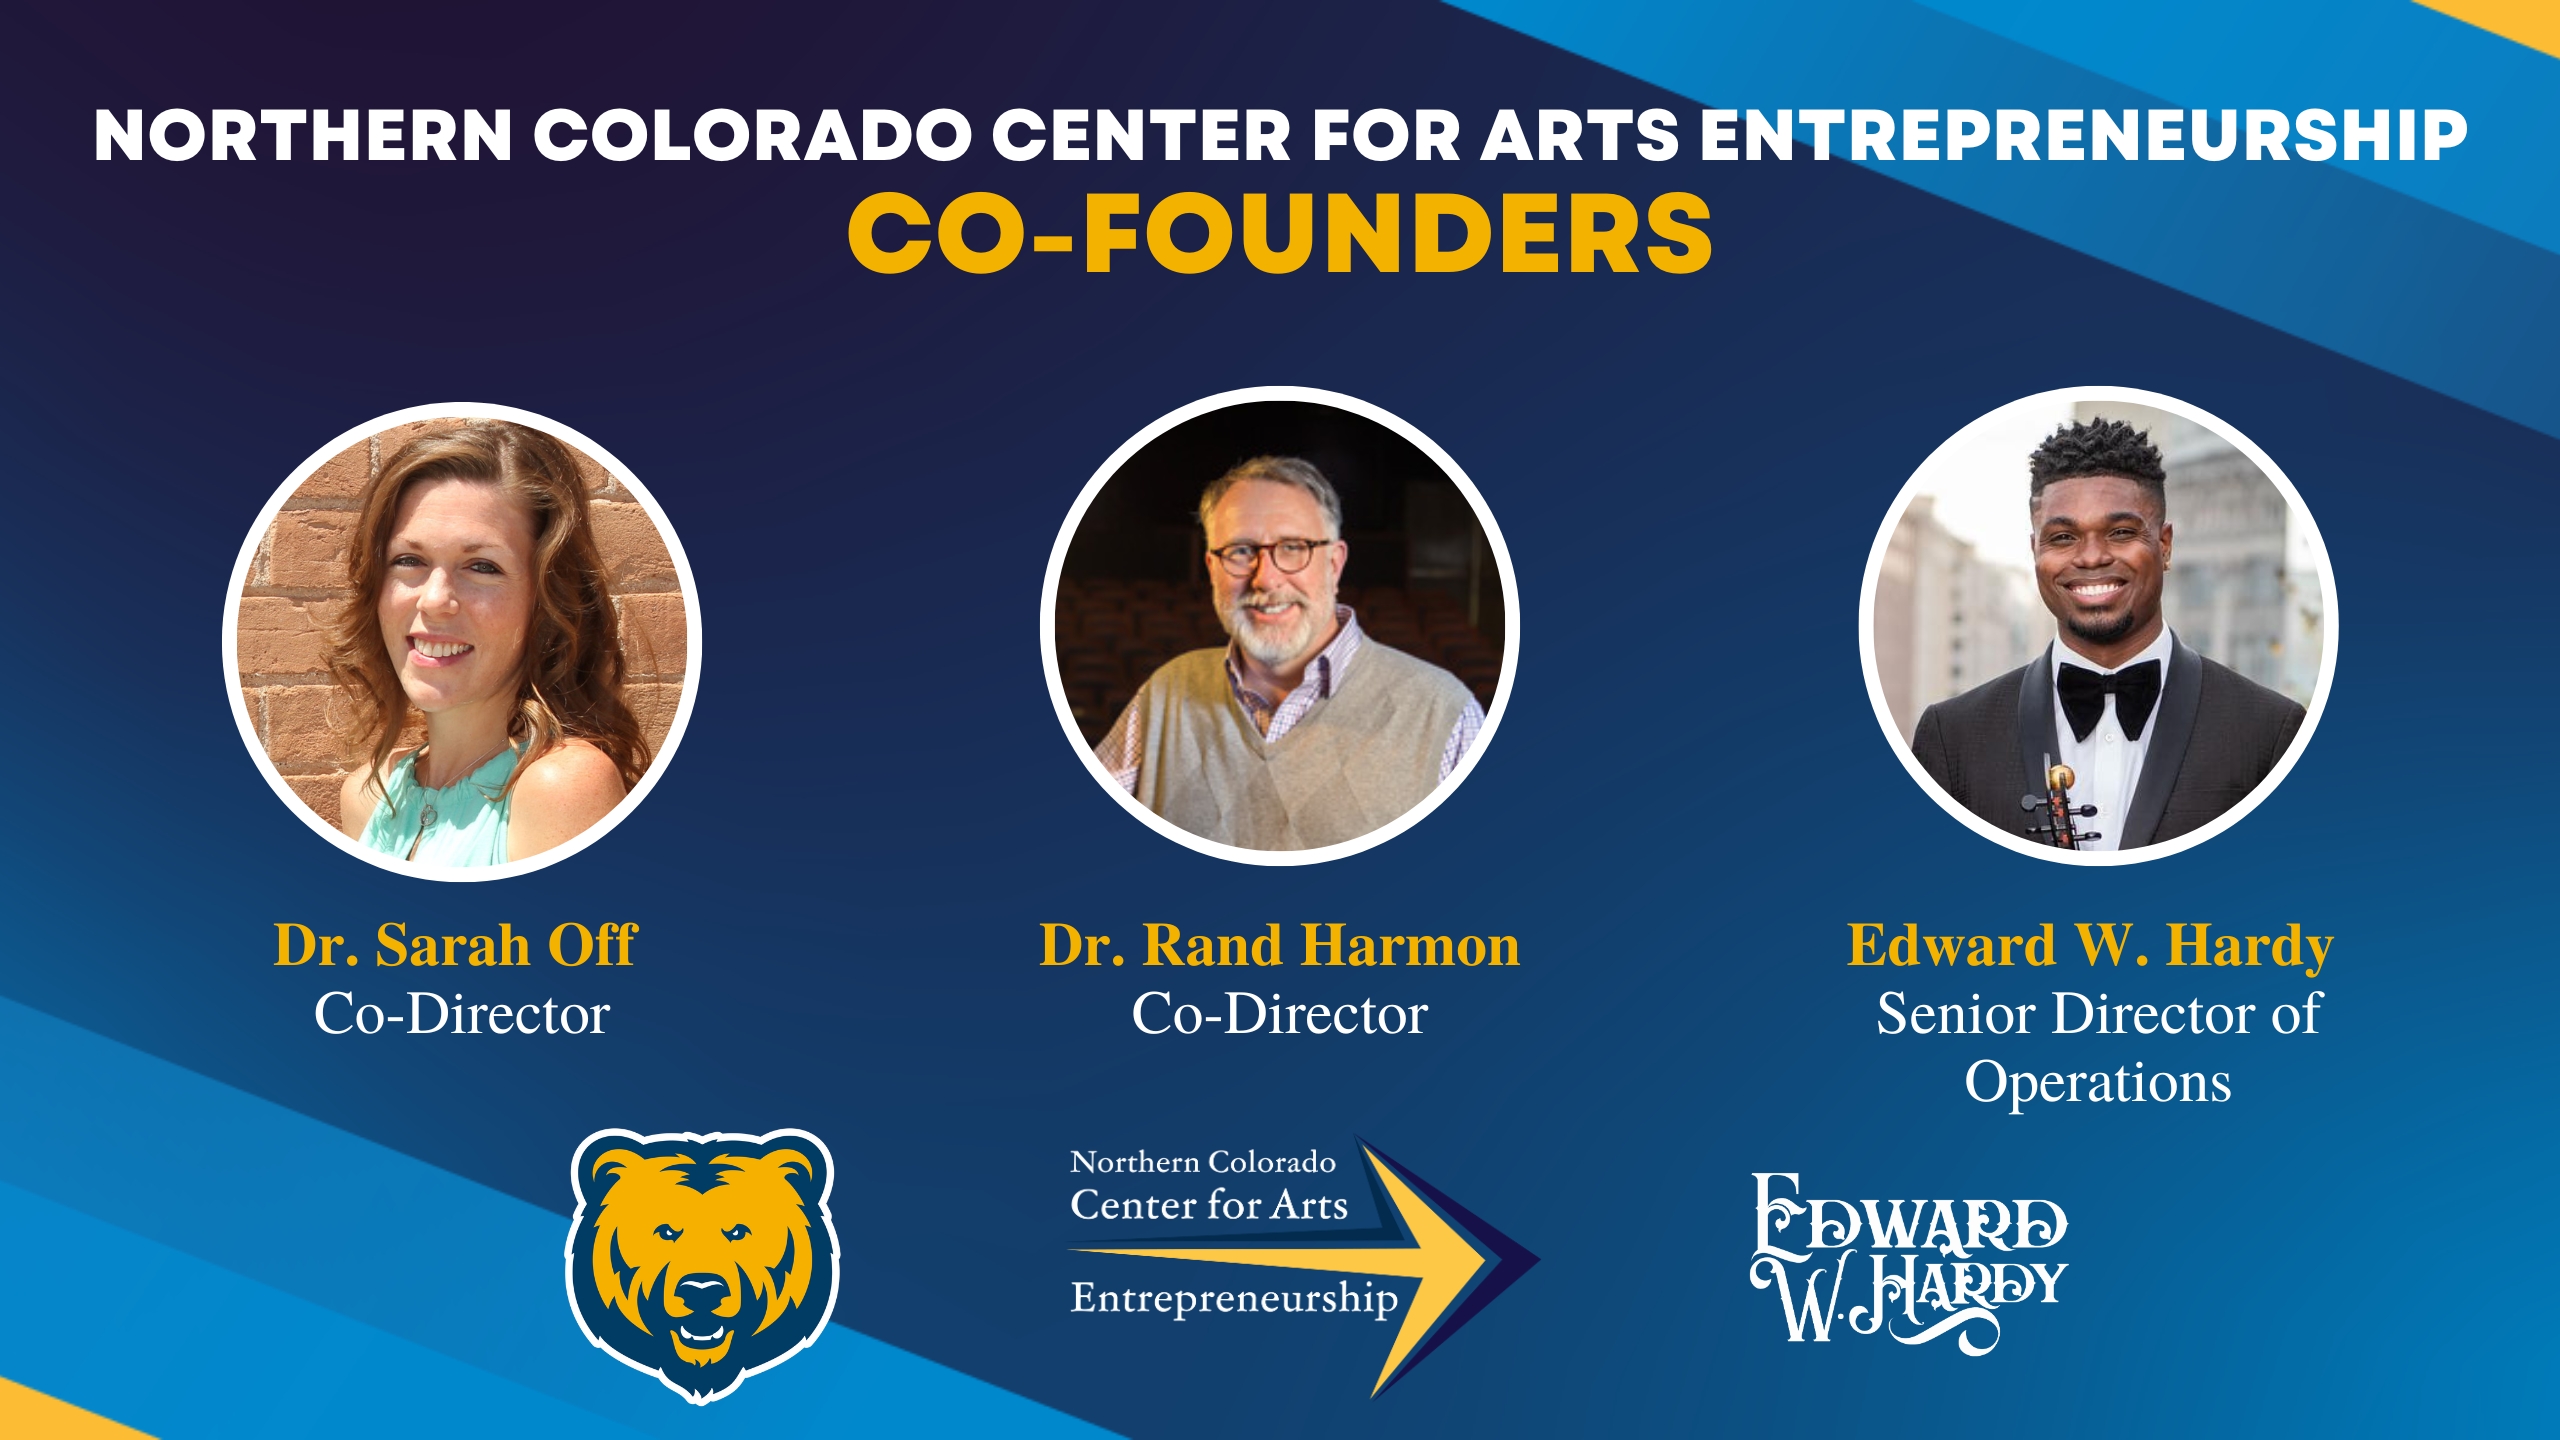 The Northern Colorado Center for Arts Entrepreneurship co-founders Edward W. Hardy and Drs. Sarah Off & Rand Harmon (University of Northern Colorado: College of Performing and Visual Arts).